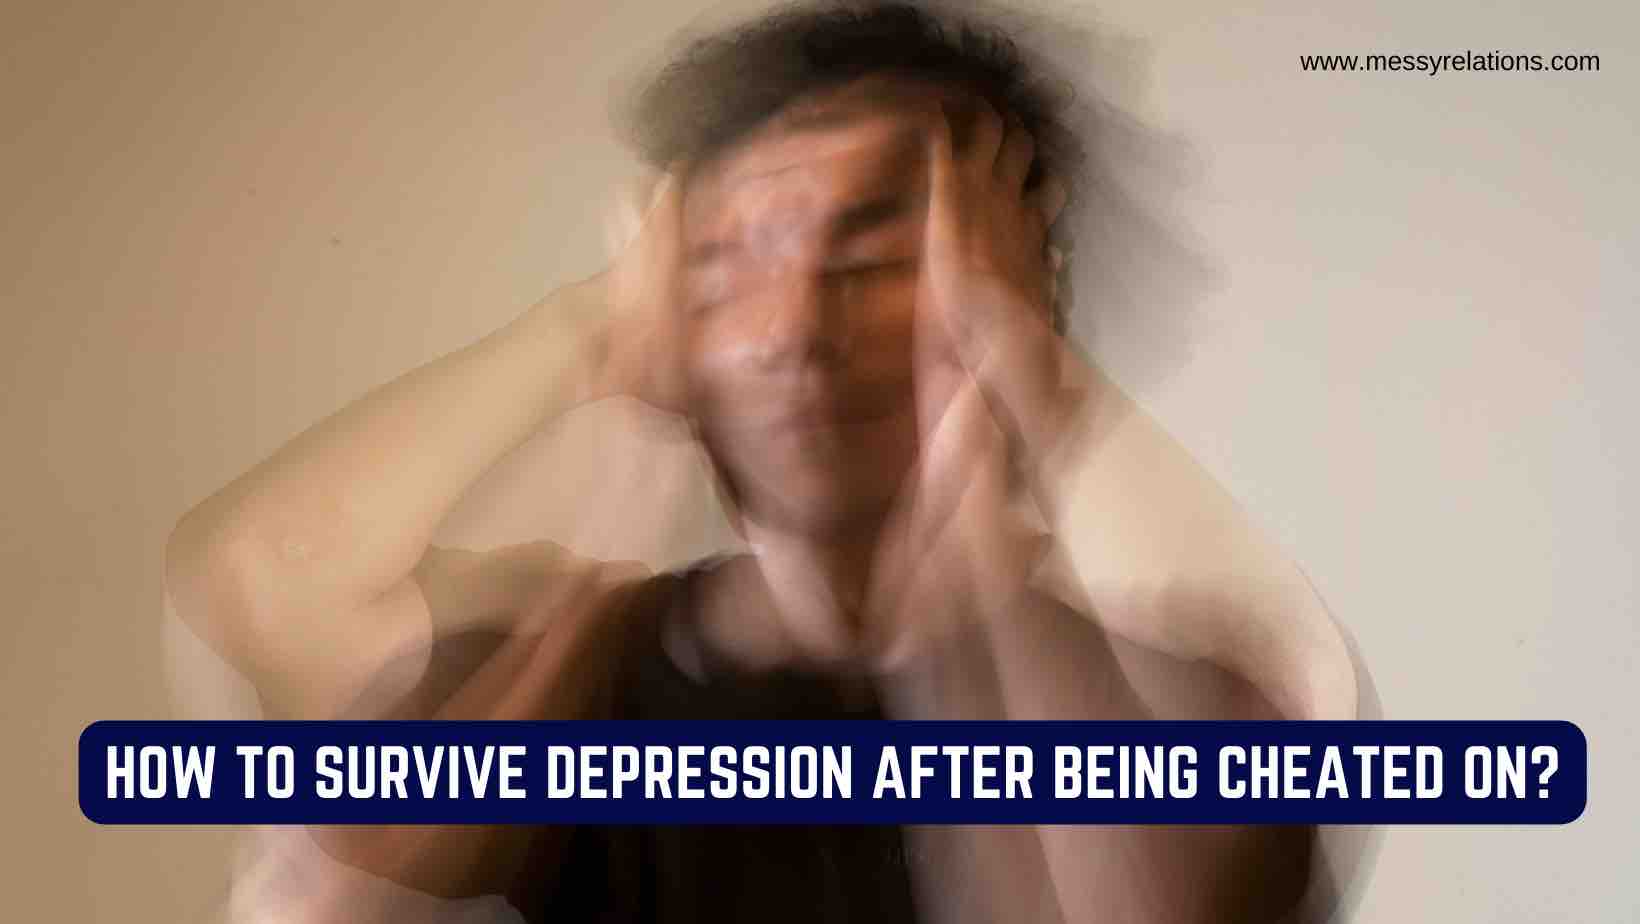 How to Survive Depression After Being Cheated On?